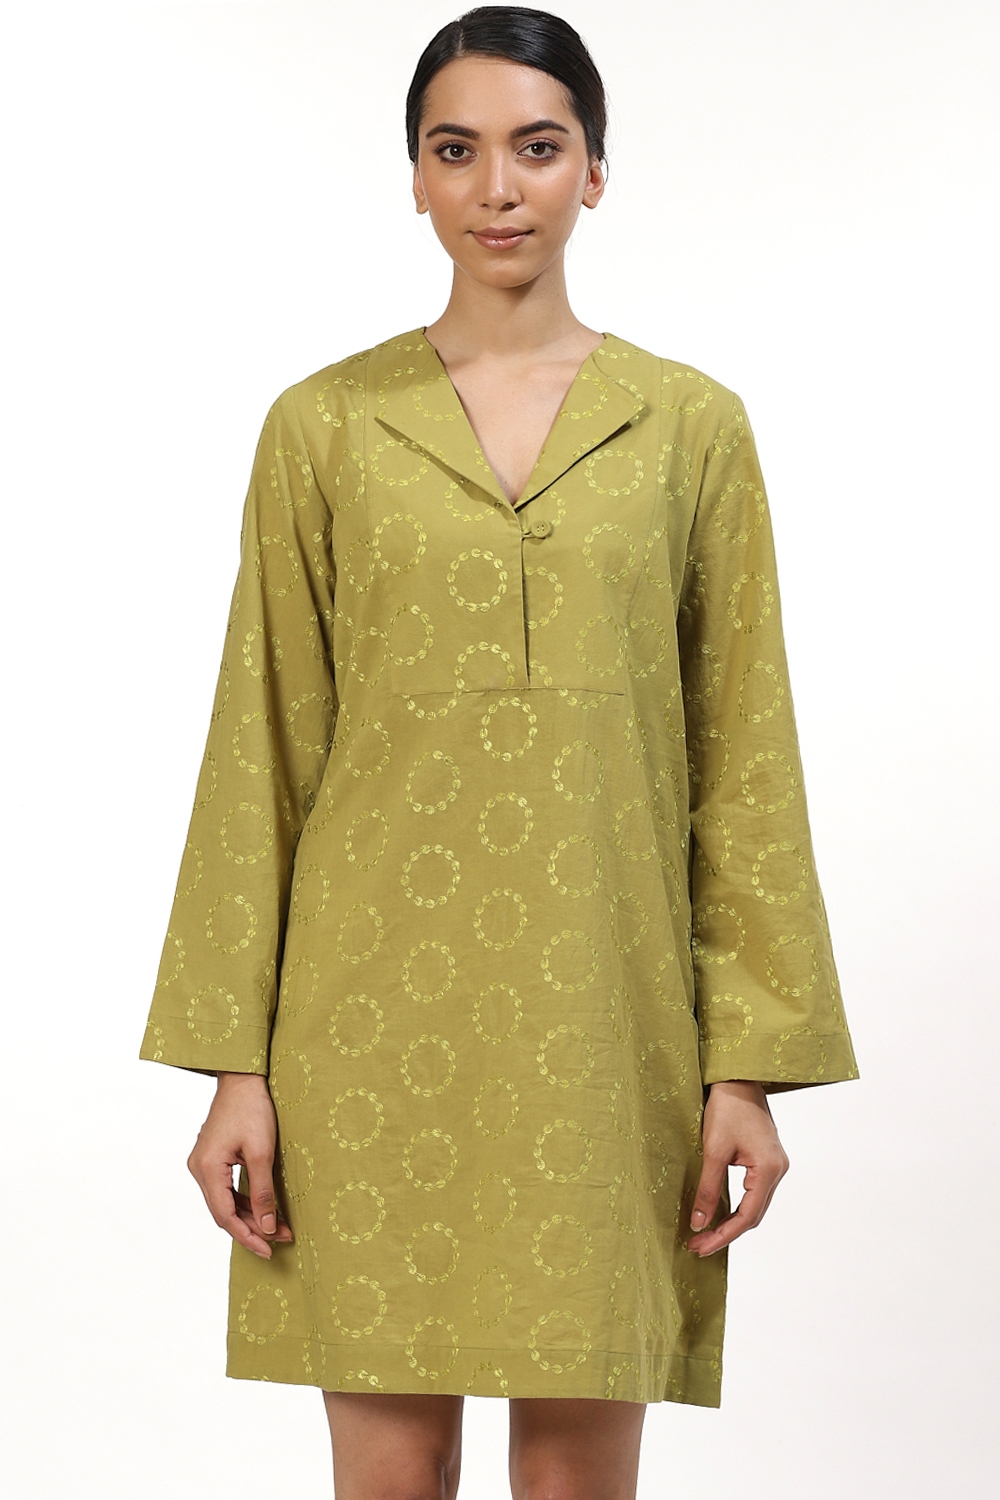 ABRAHAM AND THAKORE | Amla With Lime Rings Dress